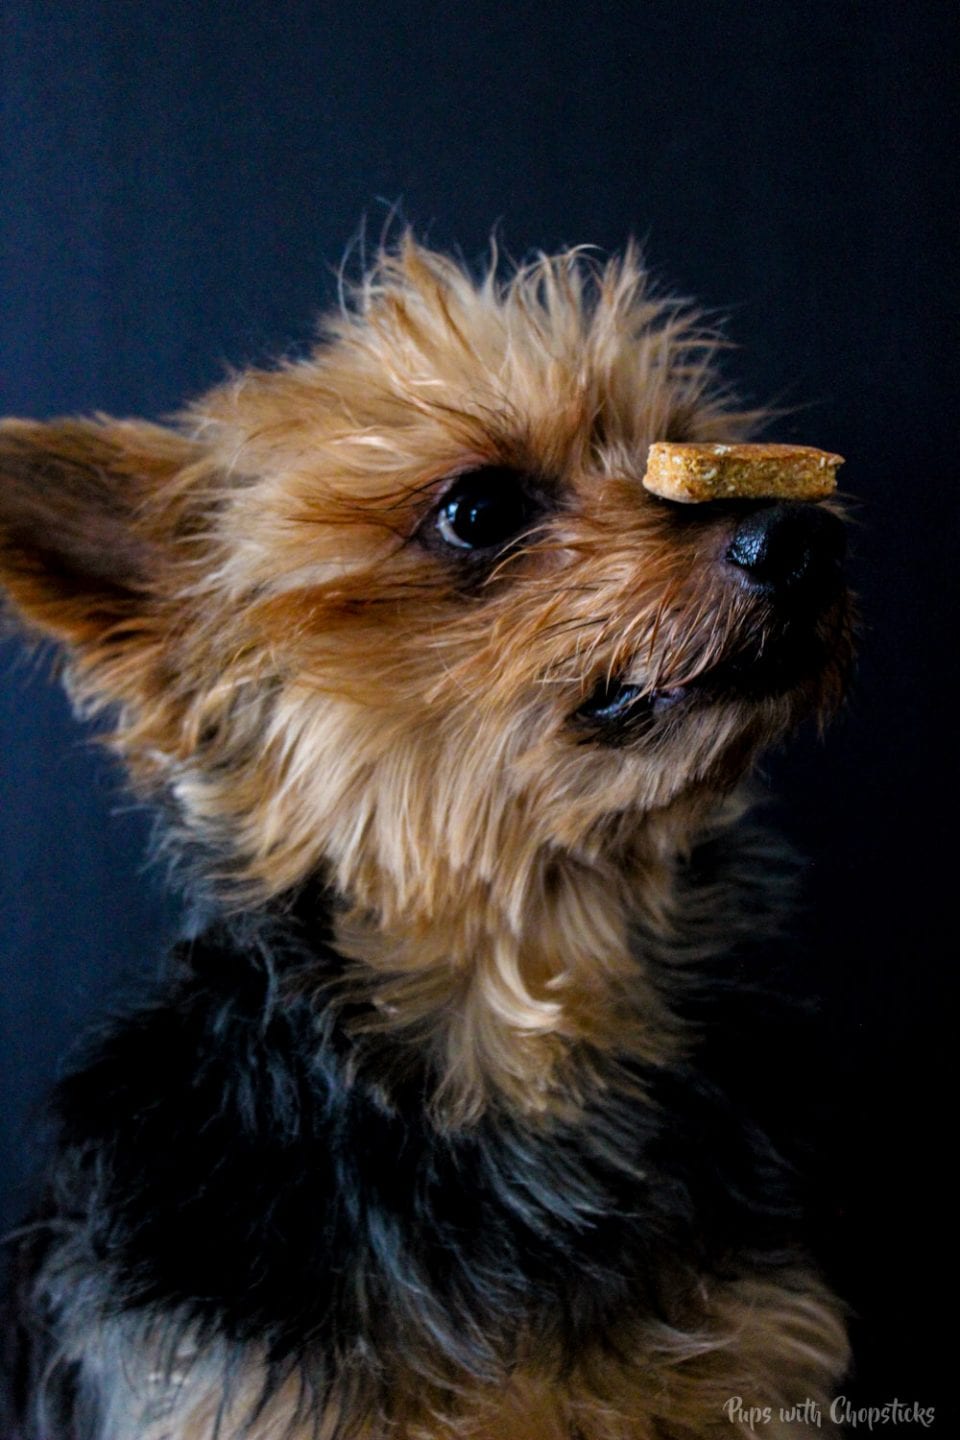 My dog balancing a 6 Ingredient Homemade Dog Treat on his nose